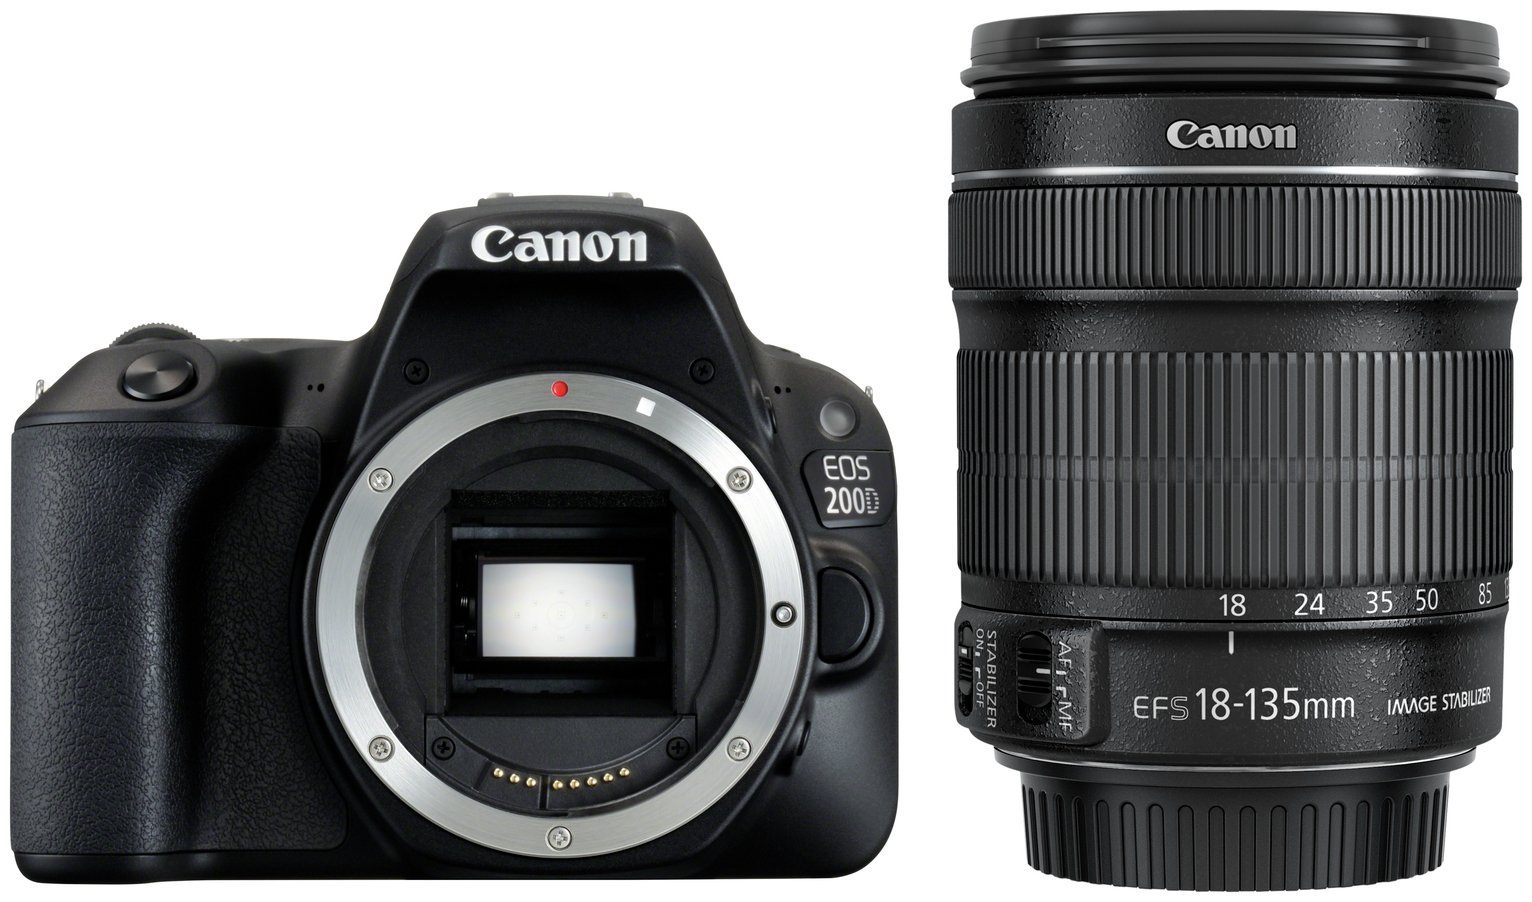 Canon EOS 200D DSLR Camera with 18-135mm Lens